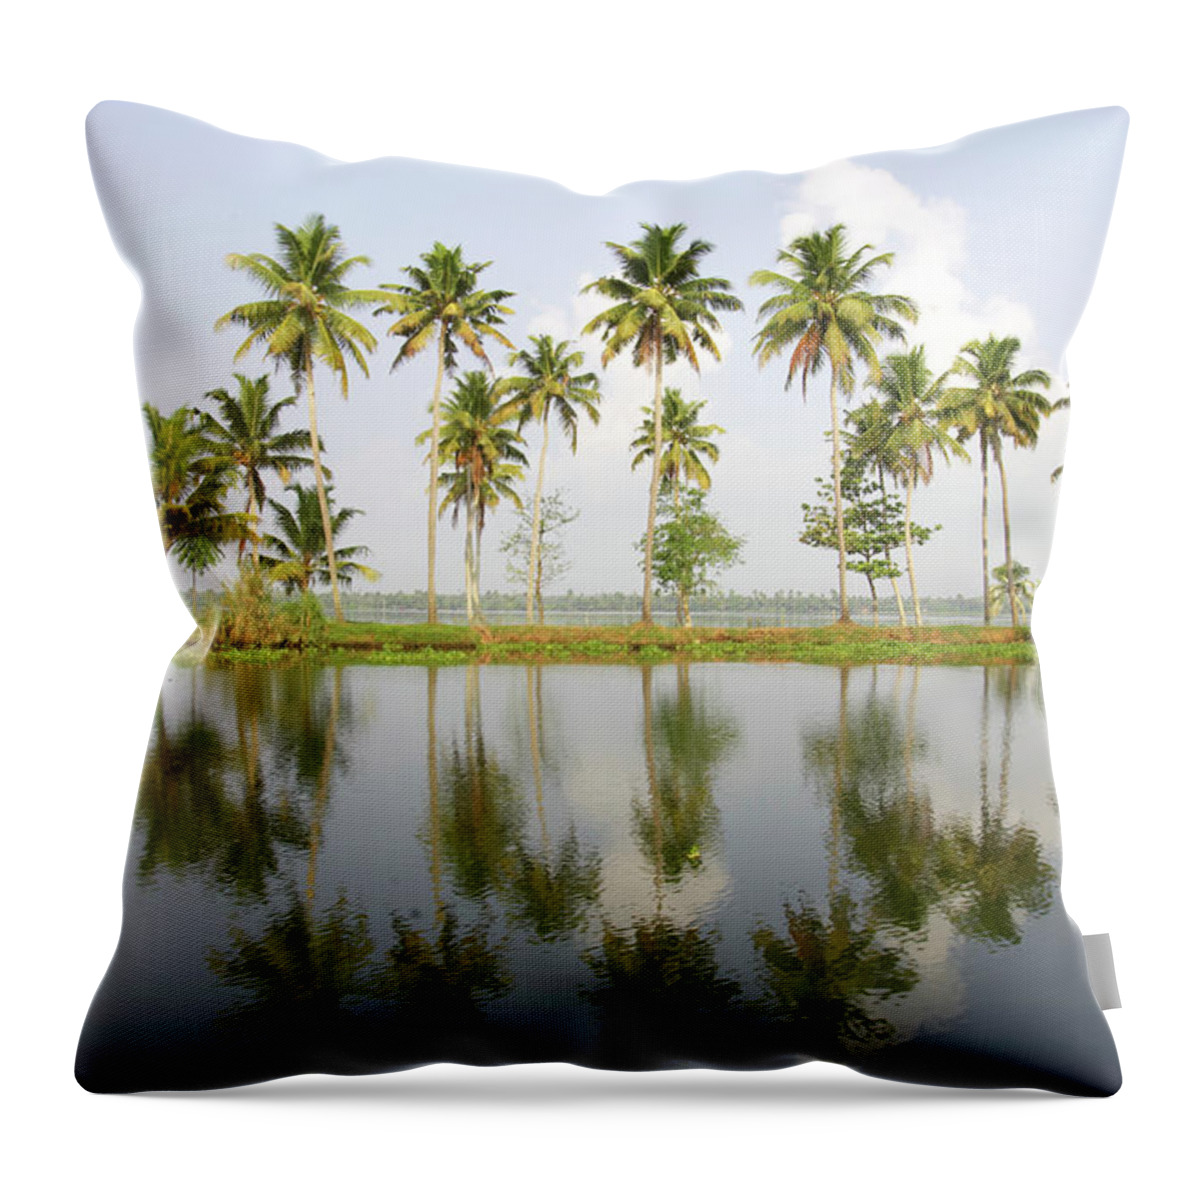 Scenics Throw Pillow featuring the photograph India, Kerala, Alappuzha, Palm Trees by Sydney James